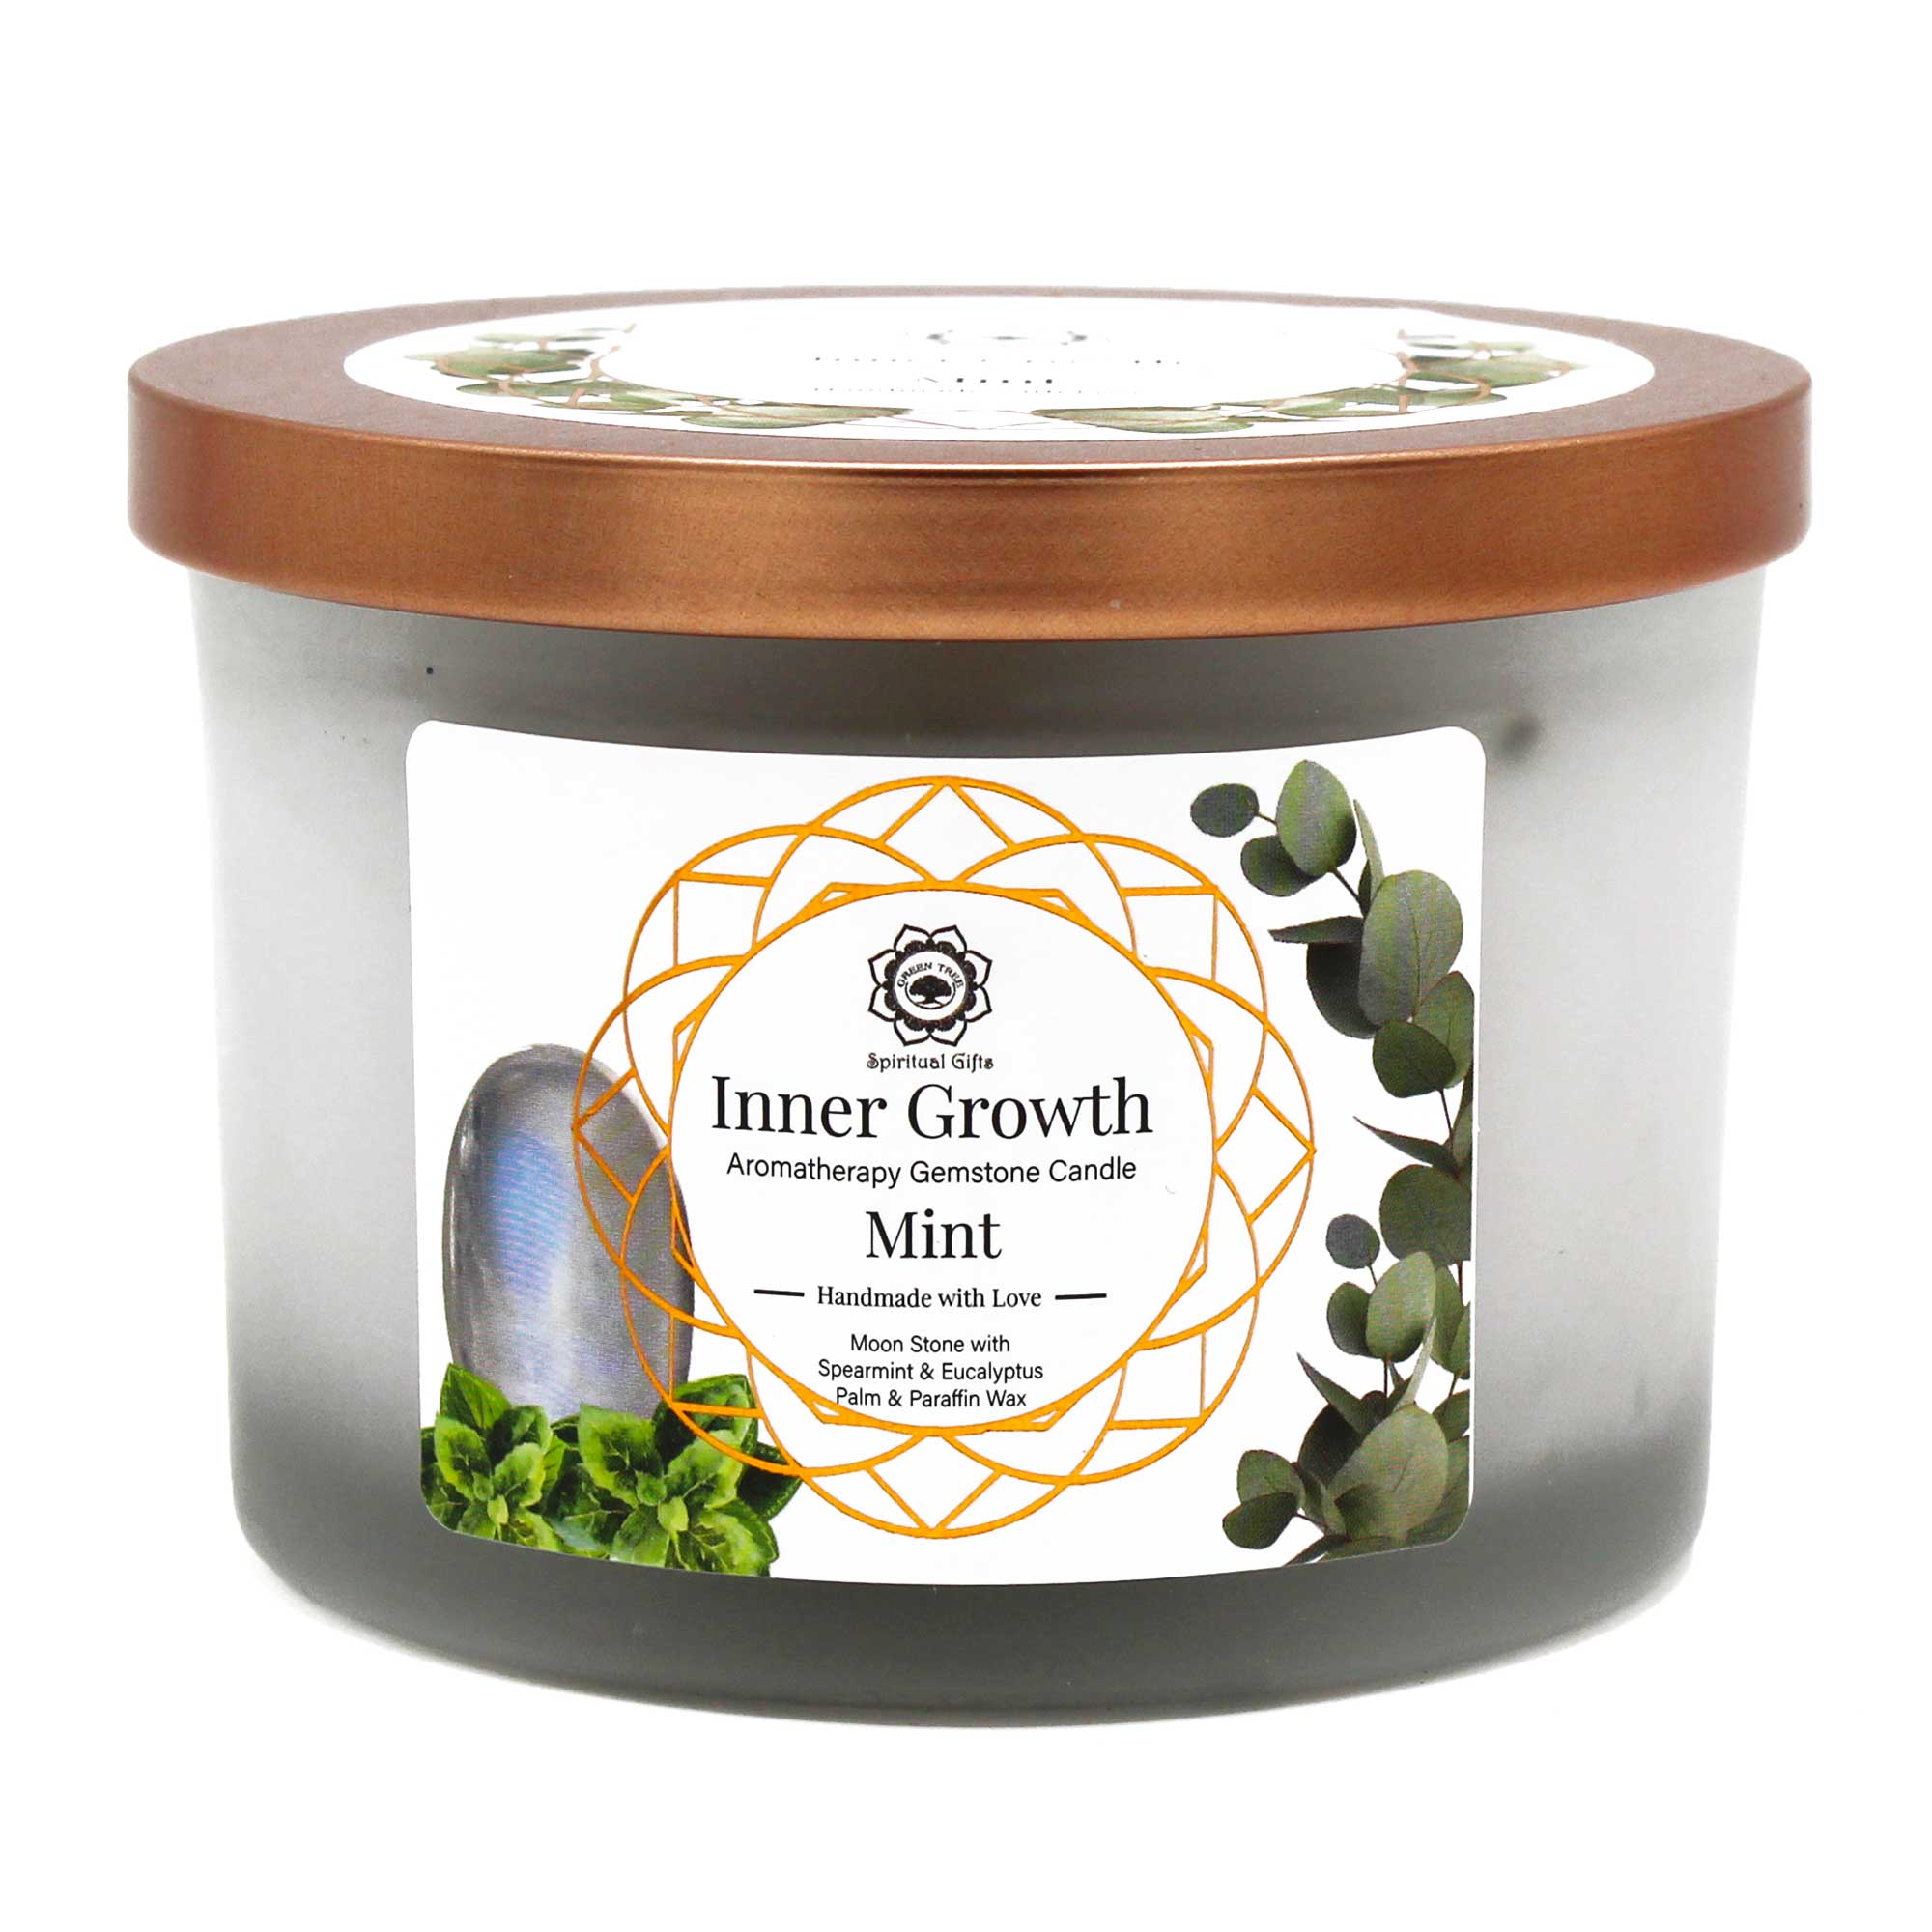 View Mint and Moonstone Gemstone Candle Inner Growth information